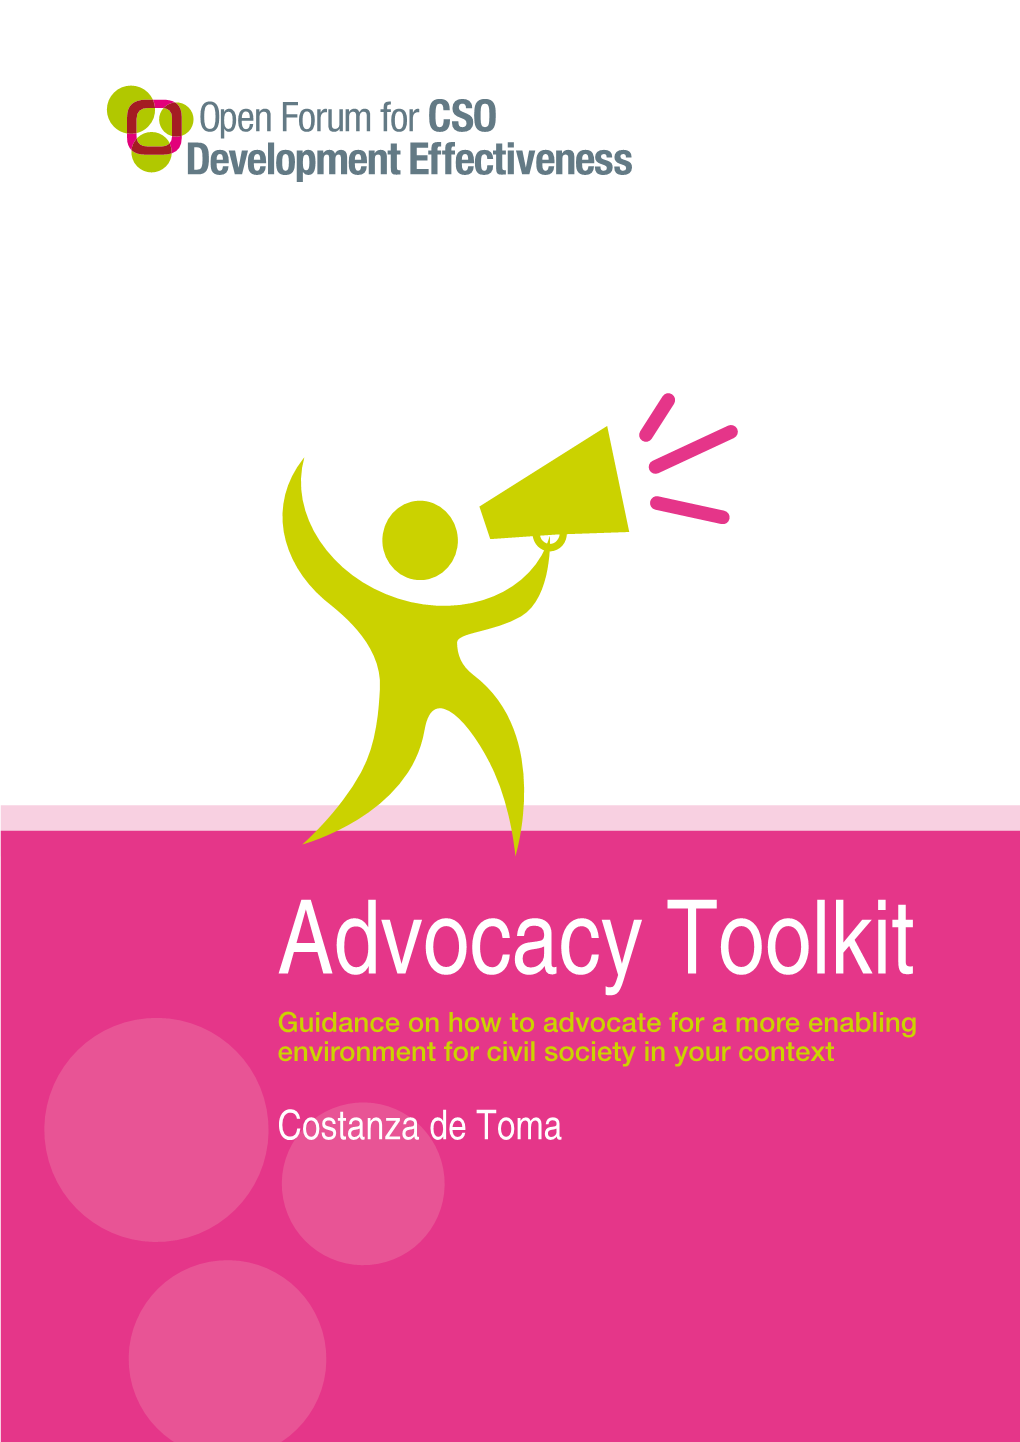 Advocacy Toolkit Guidance on How to Advocate for a More Enabling Environment for Civil Society in Your Context